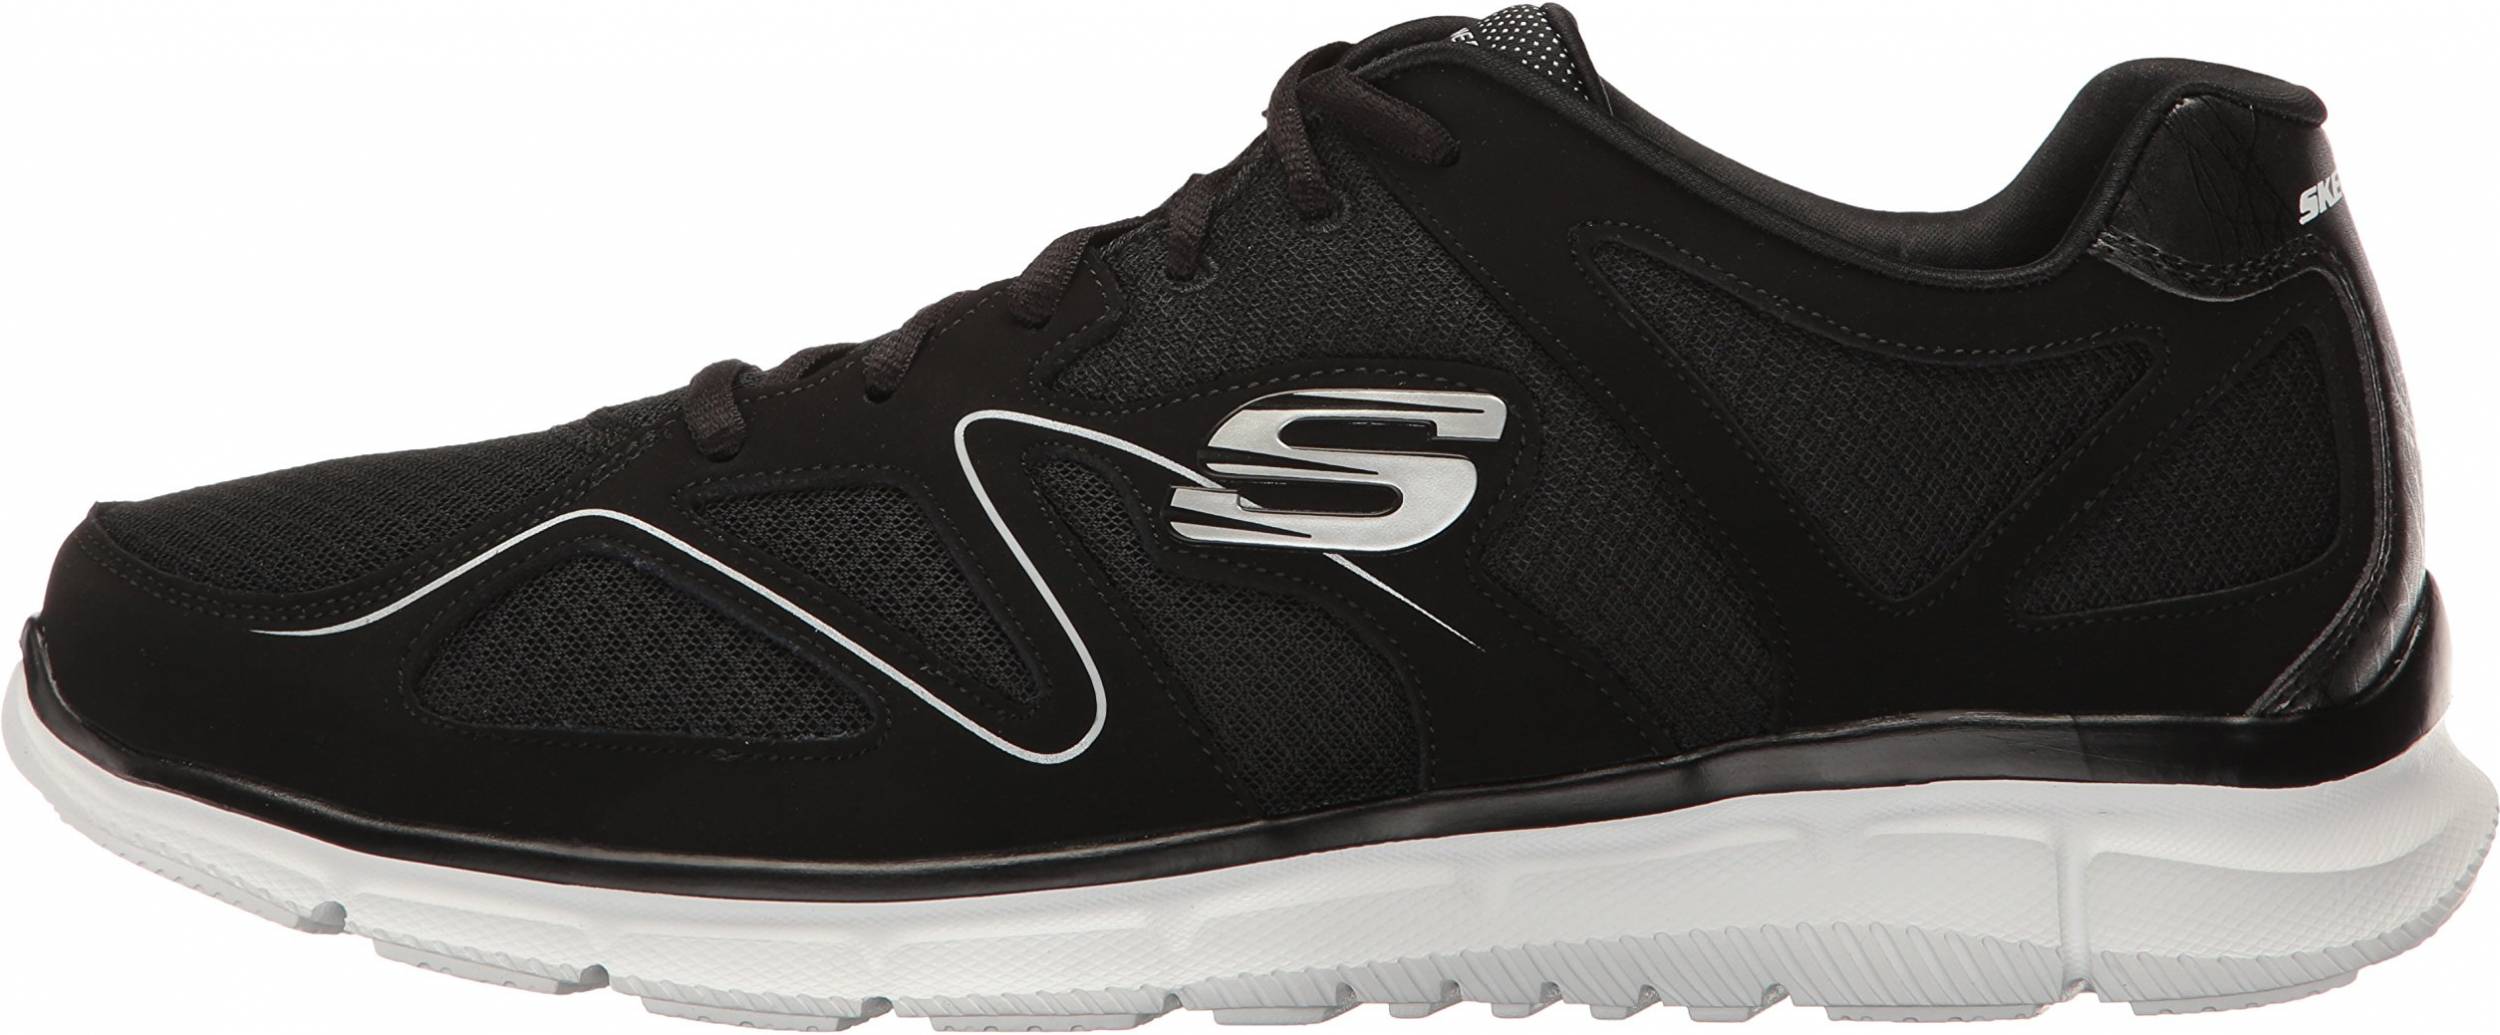 Save 29% on Skechers Workout Shoes (30 